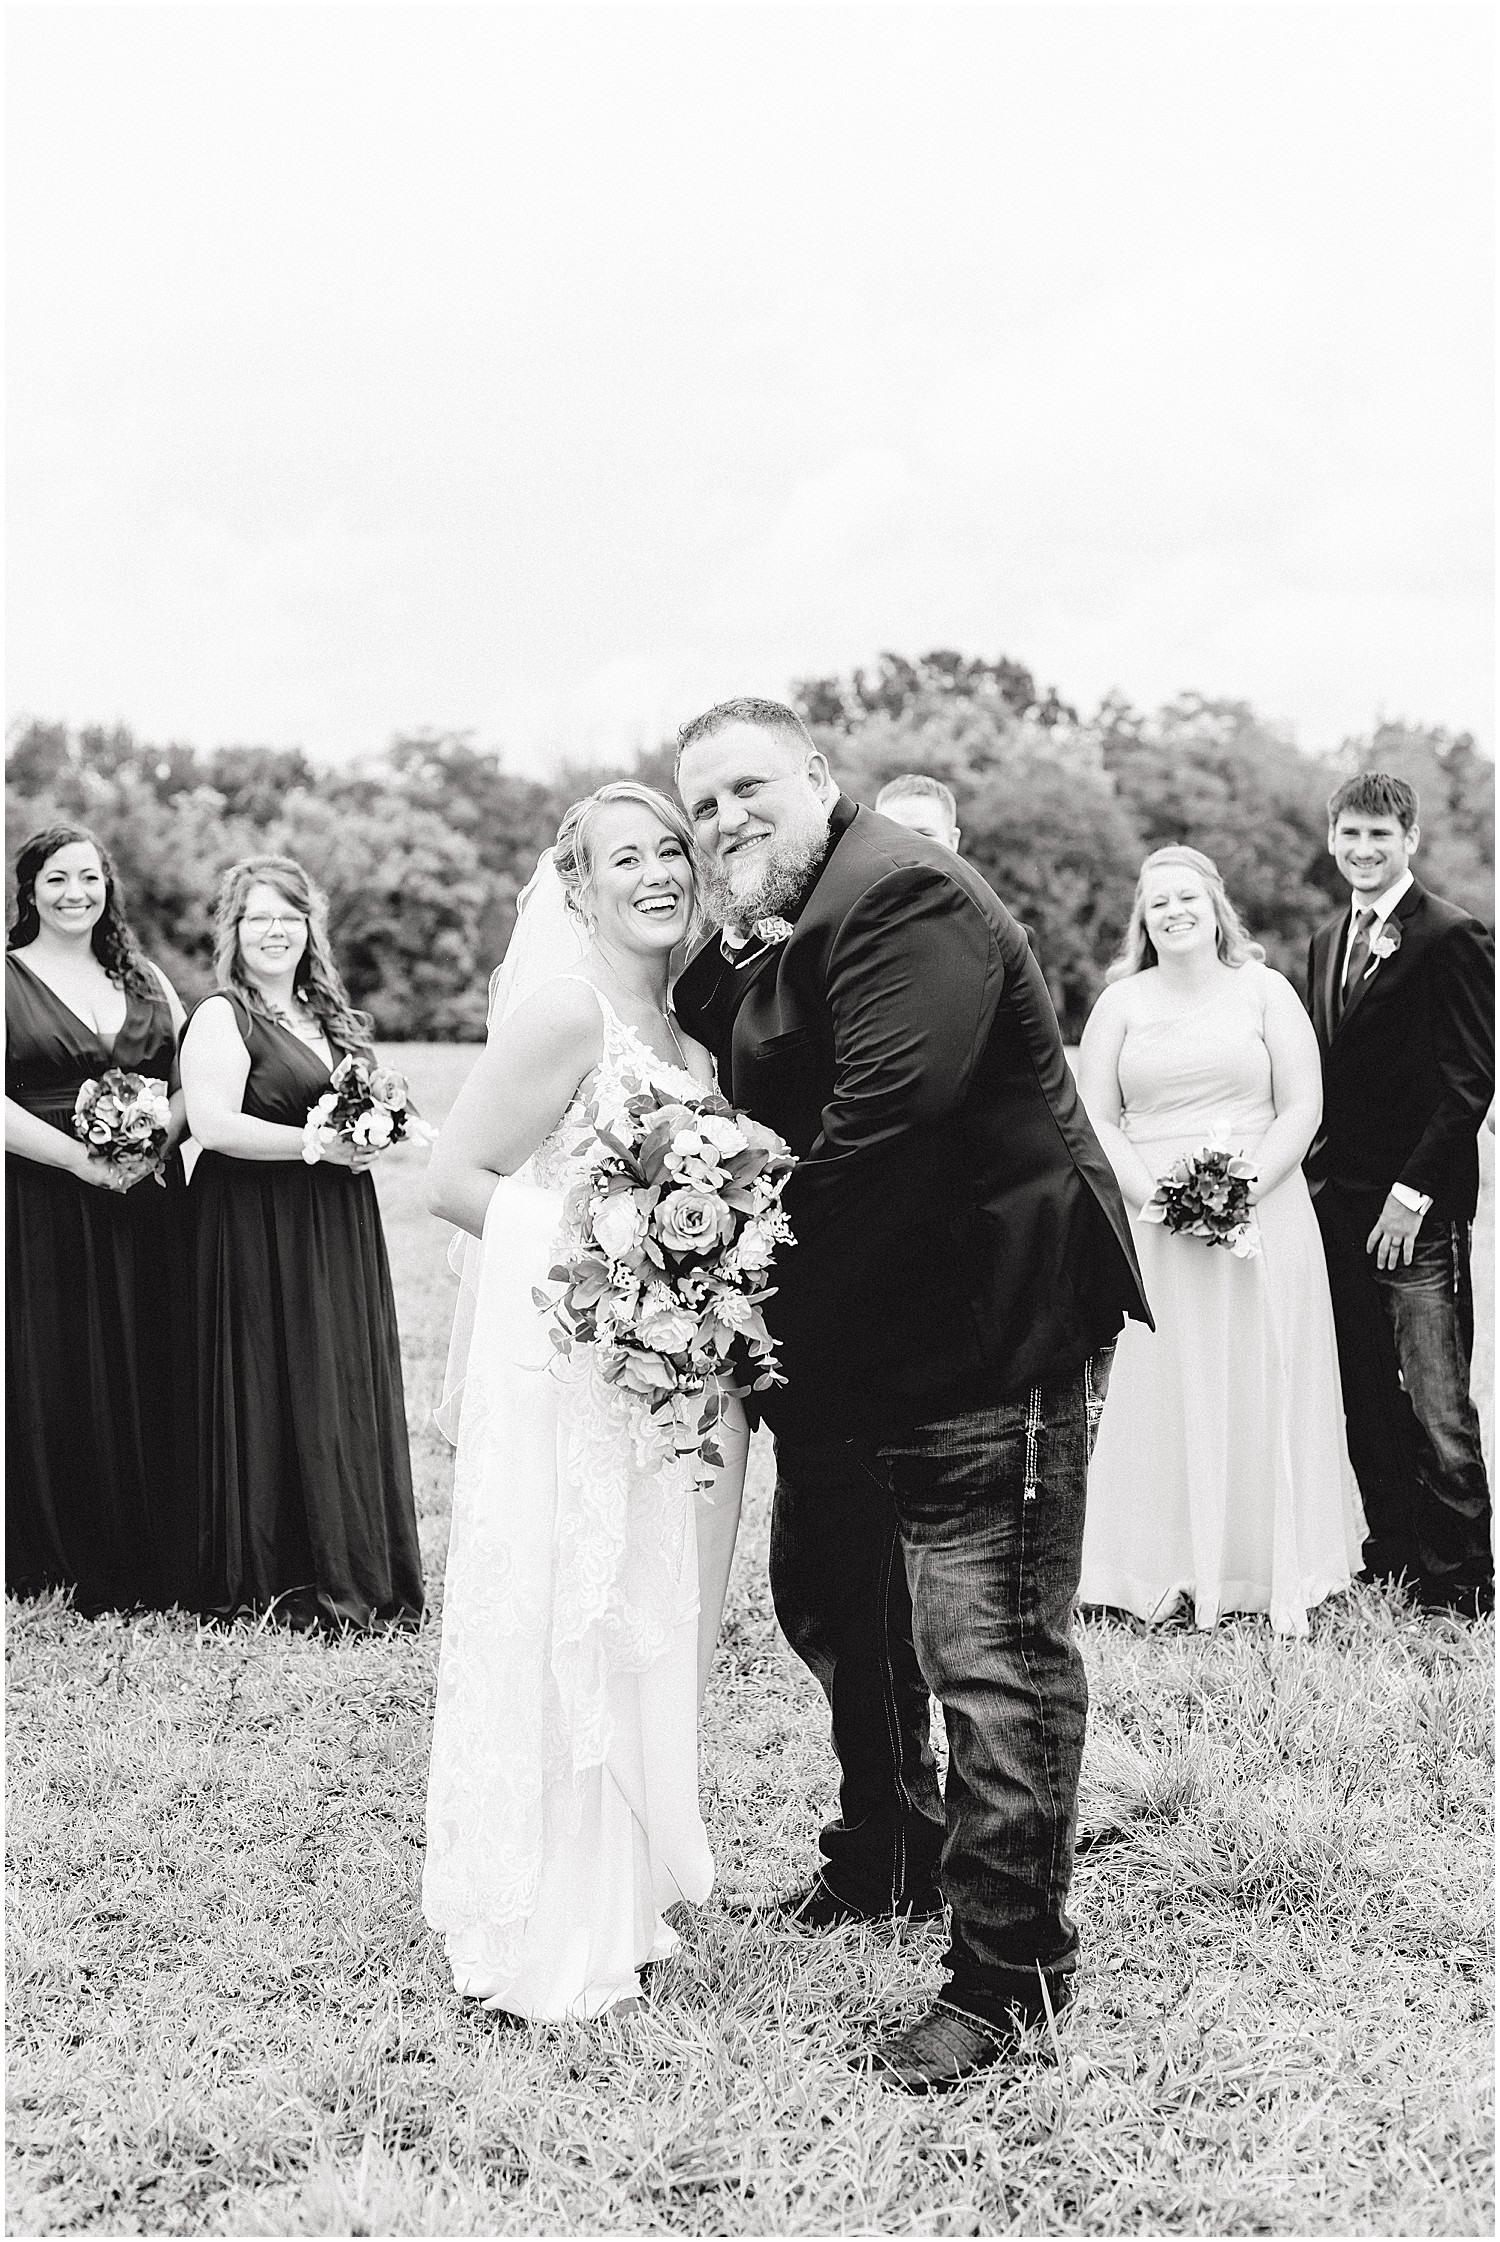 black and white image of bride and groom smiling in front of wedding party on wedding day